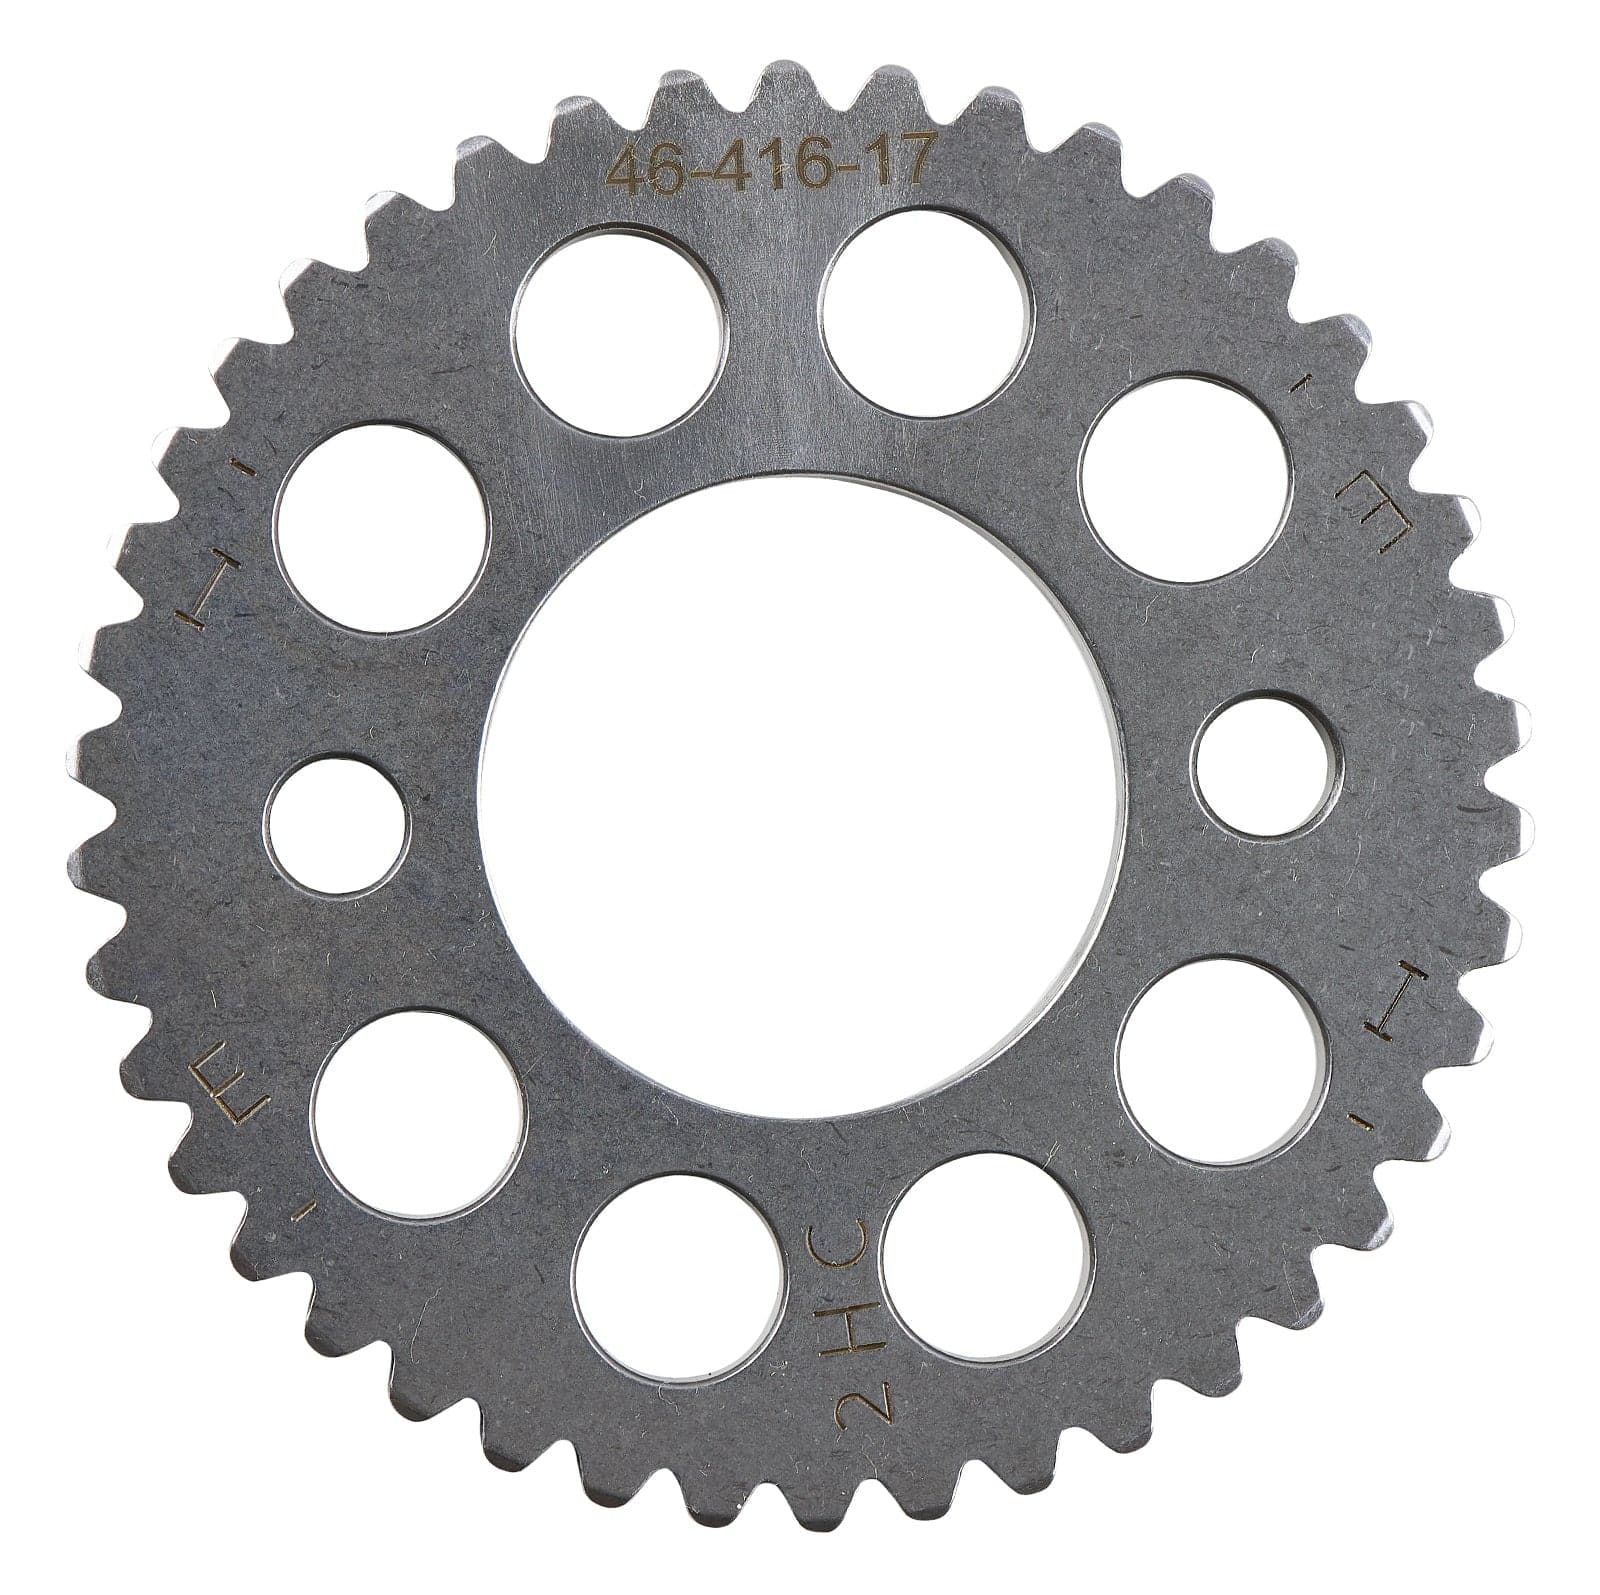 New SBT replacement 1050 Camshaft Sprocket 2HC-12176-00-00